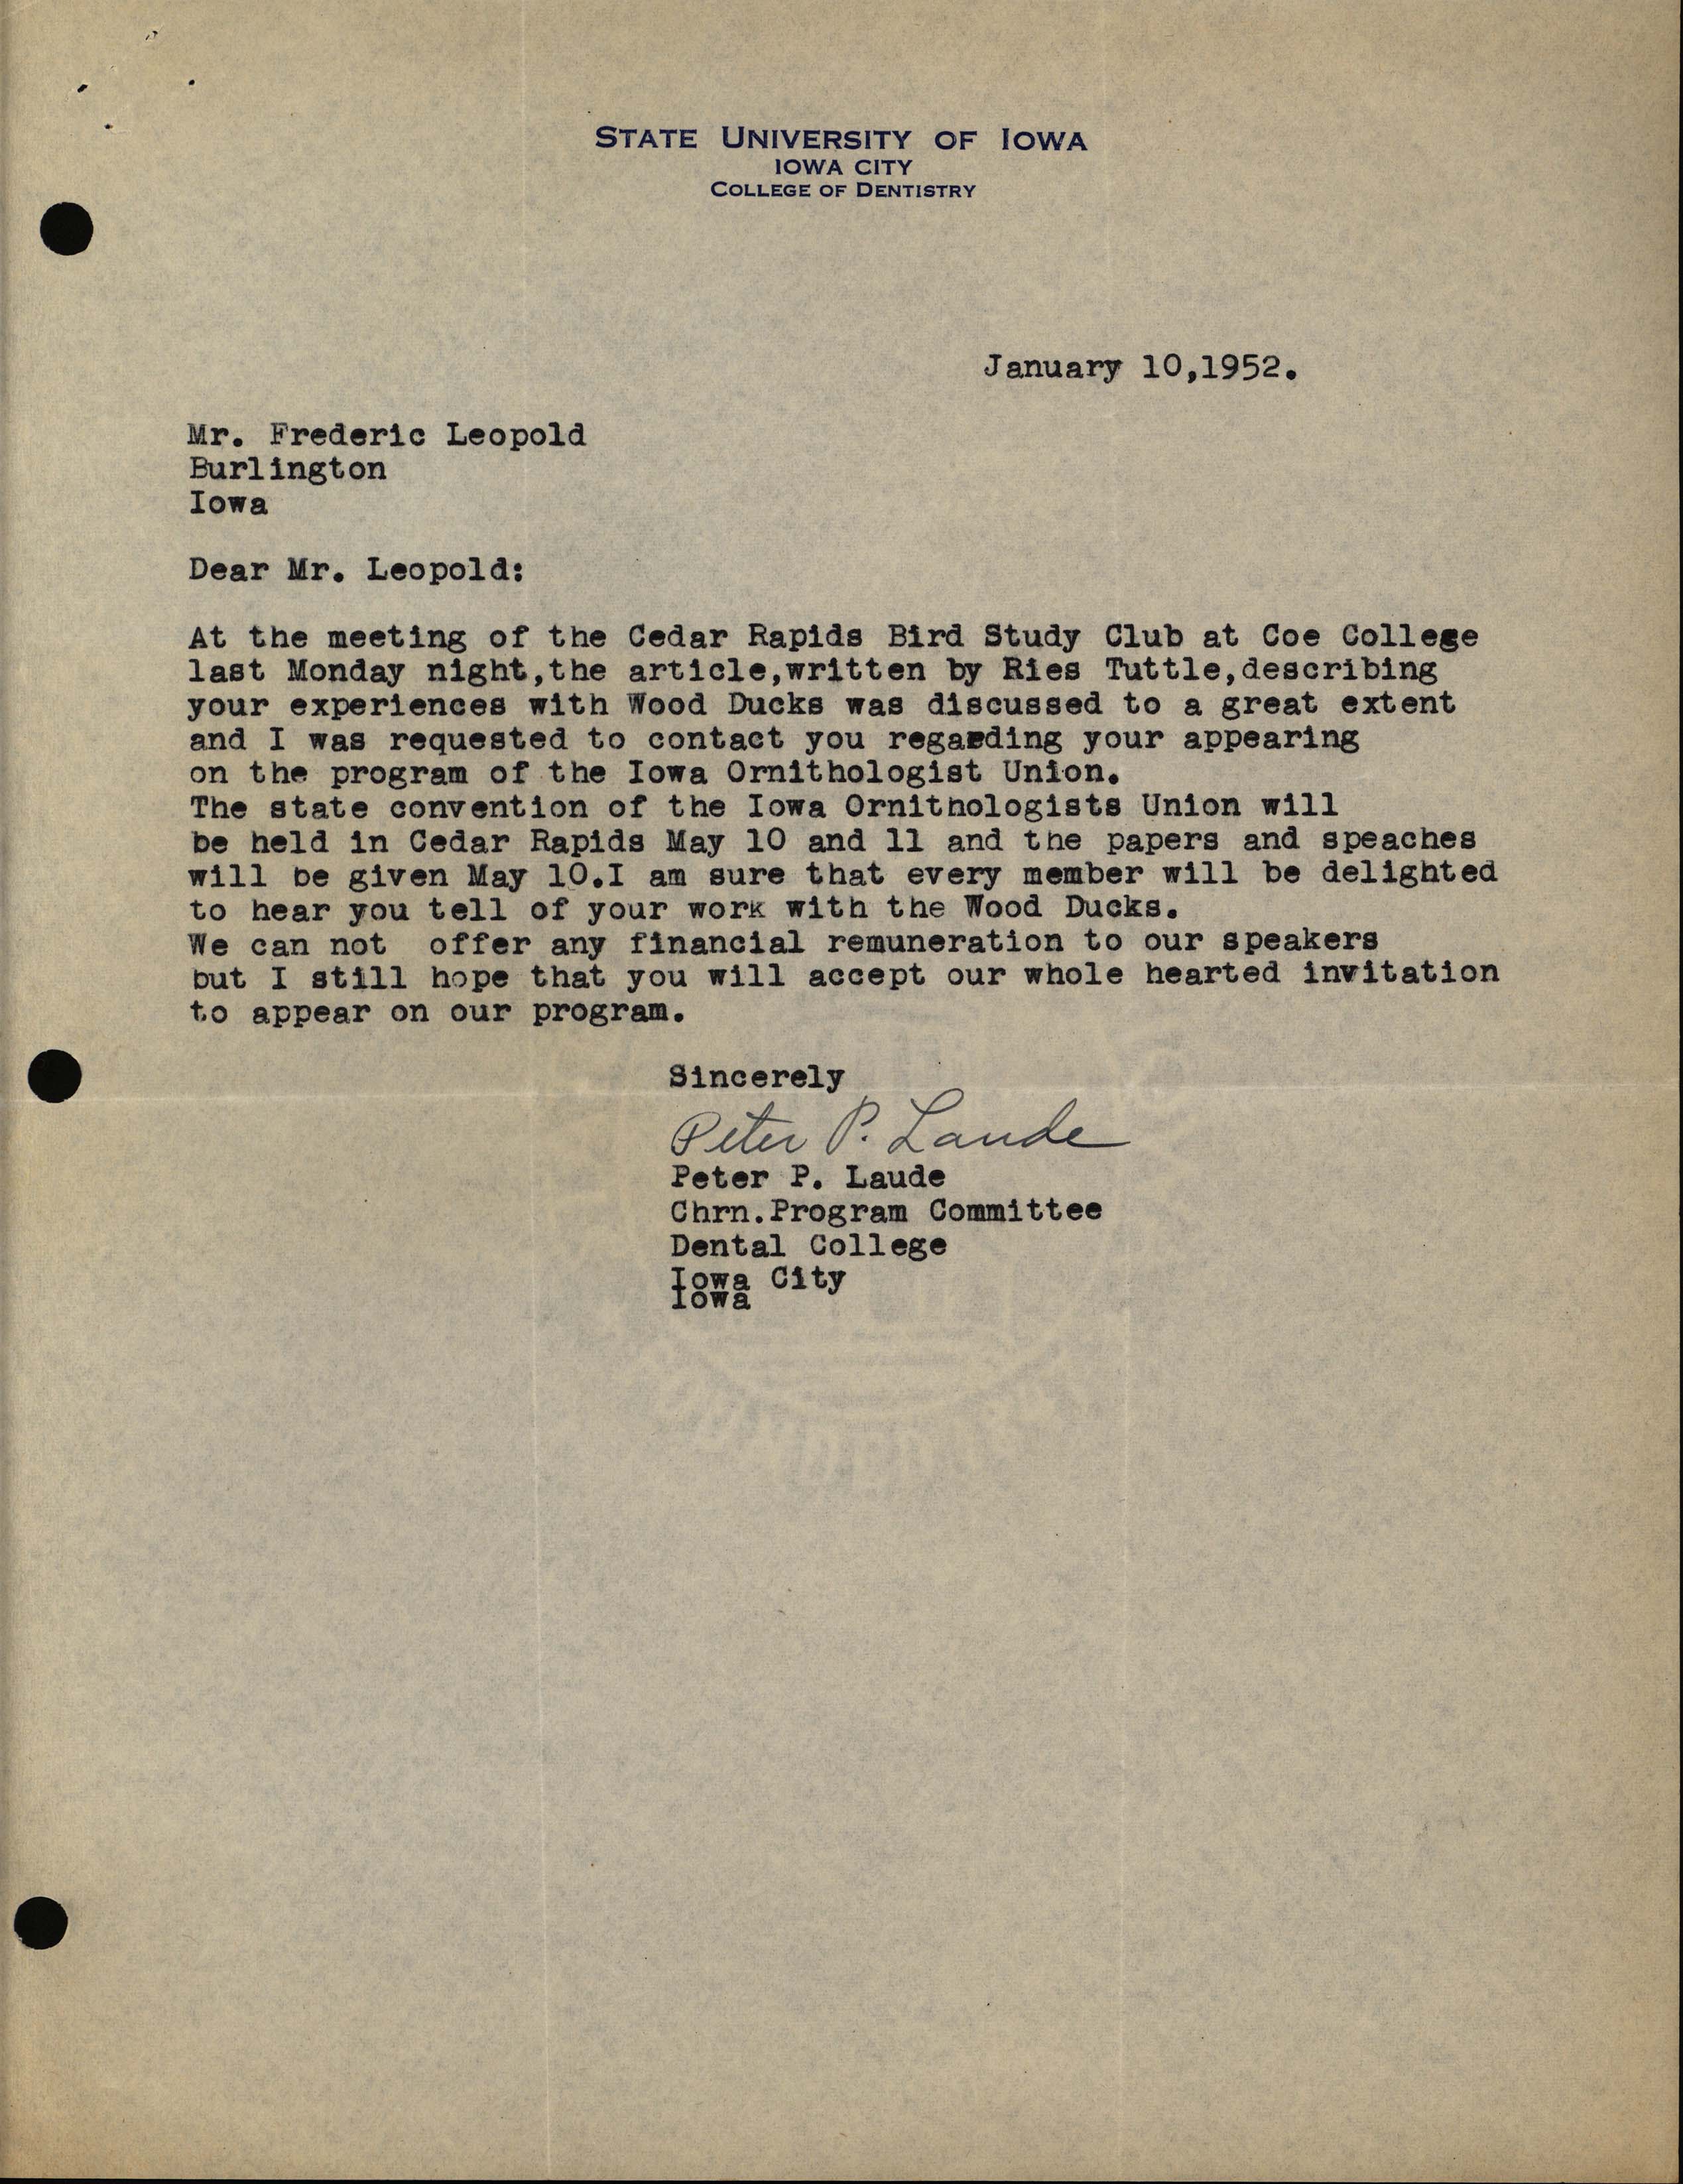 Peter P. Laude letter to Frederic Leopold regarding an invitation to speak at the Iowa Ornithologists' Union convention, January 10, 1952